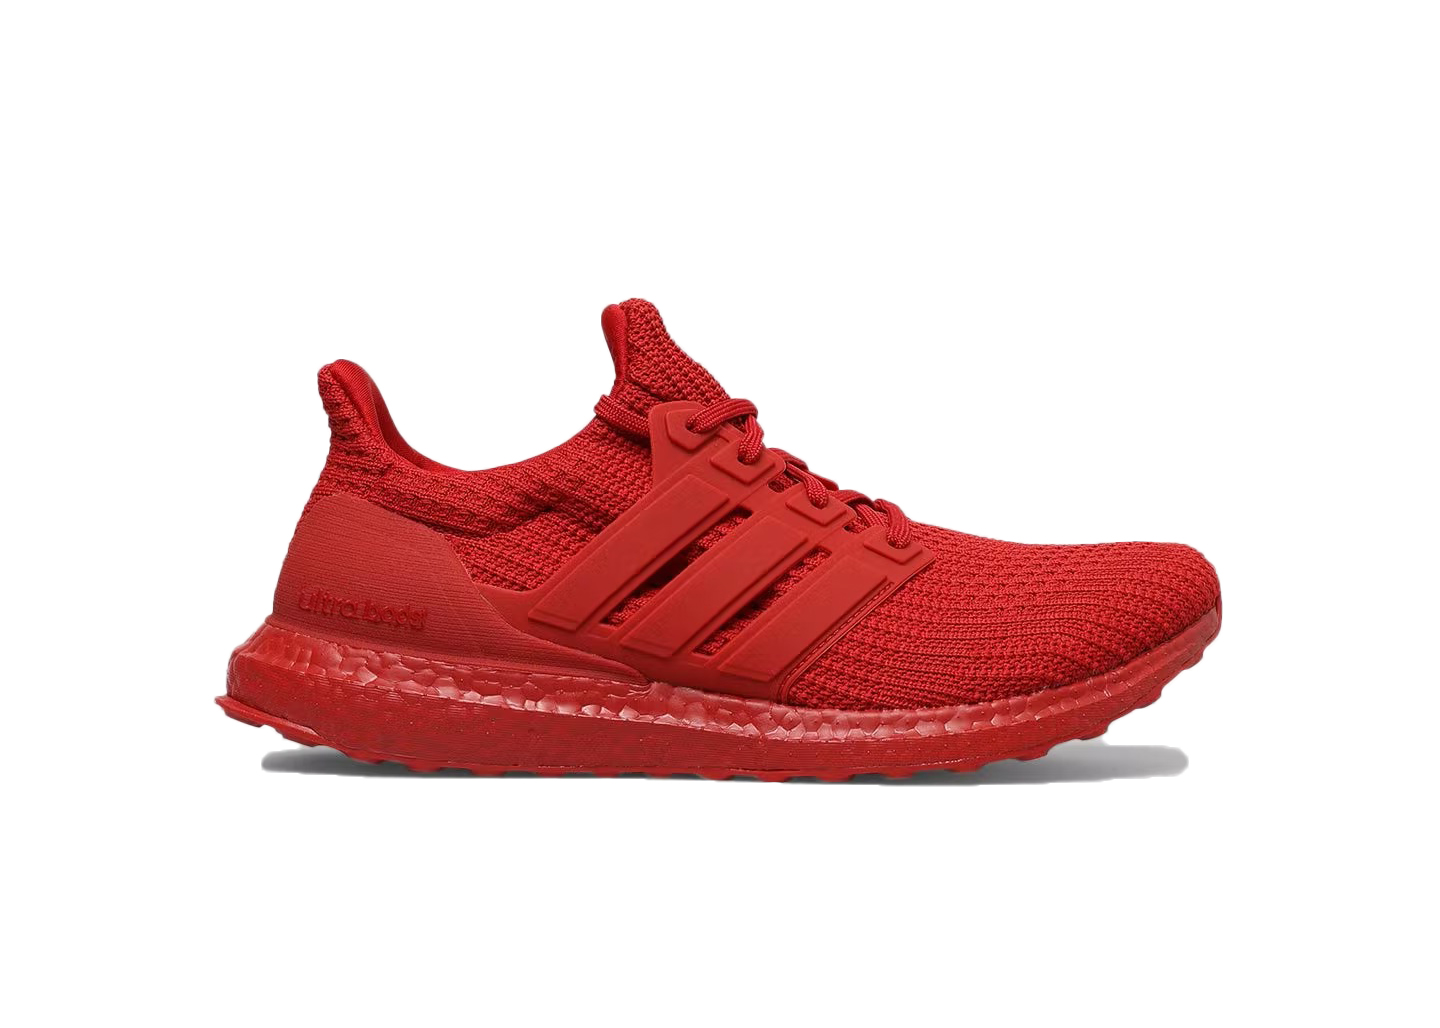 adidas Ultra Boost 4.0 DNA Triple Red Men's - GY3868 - US